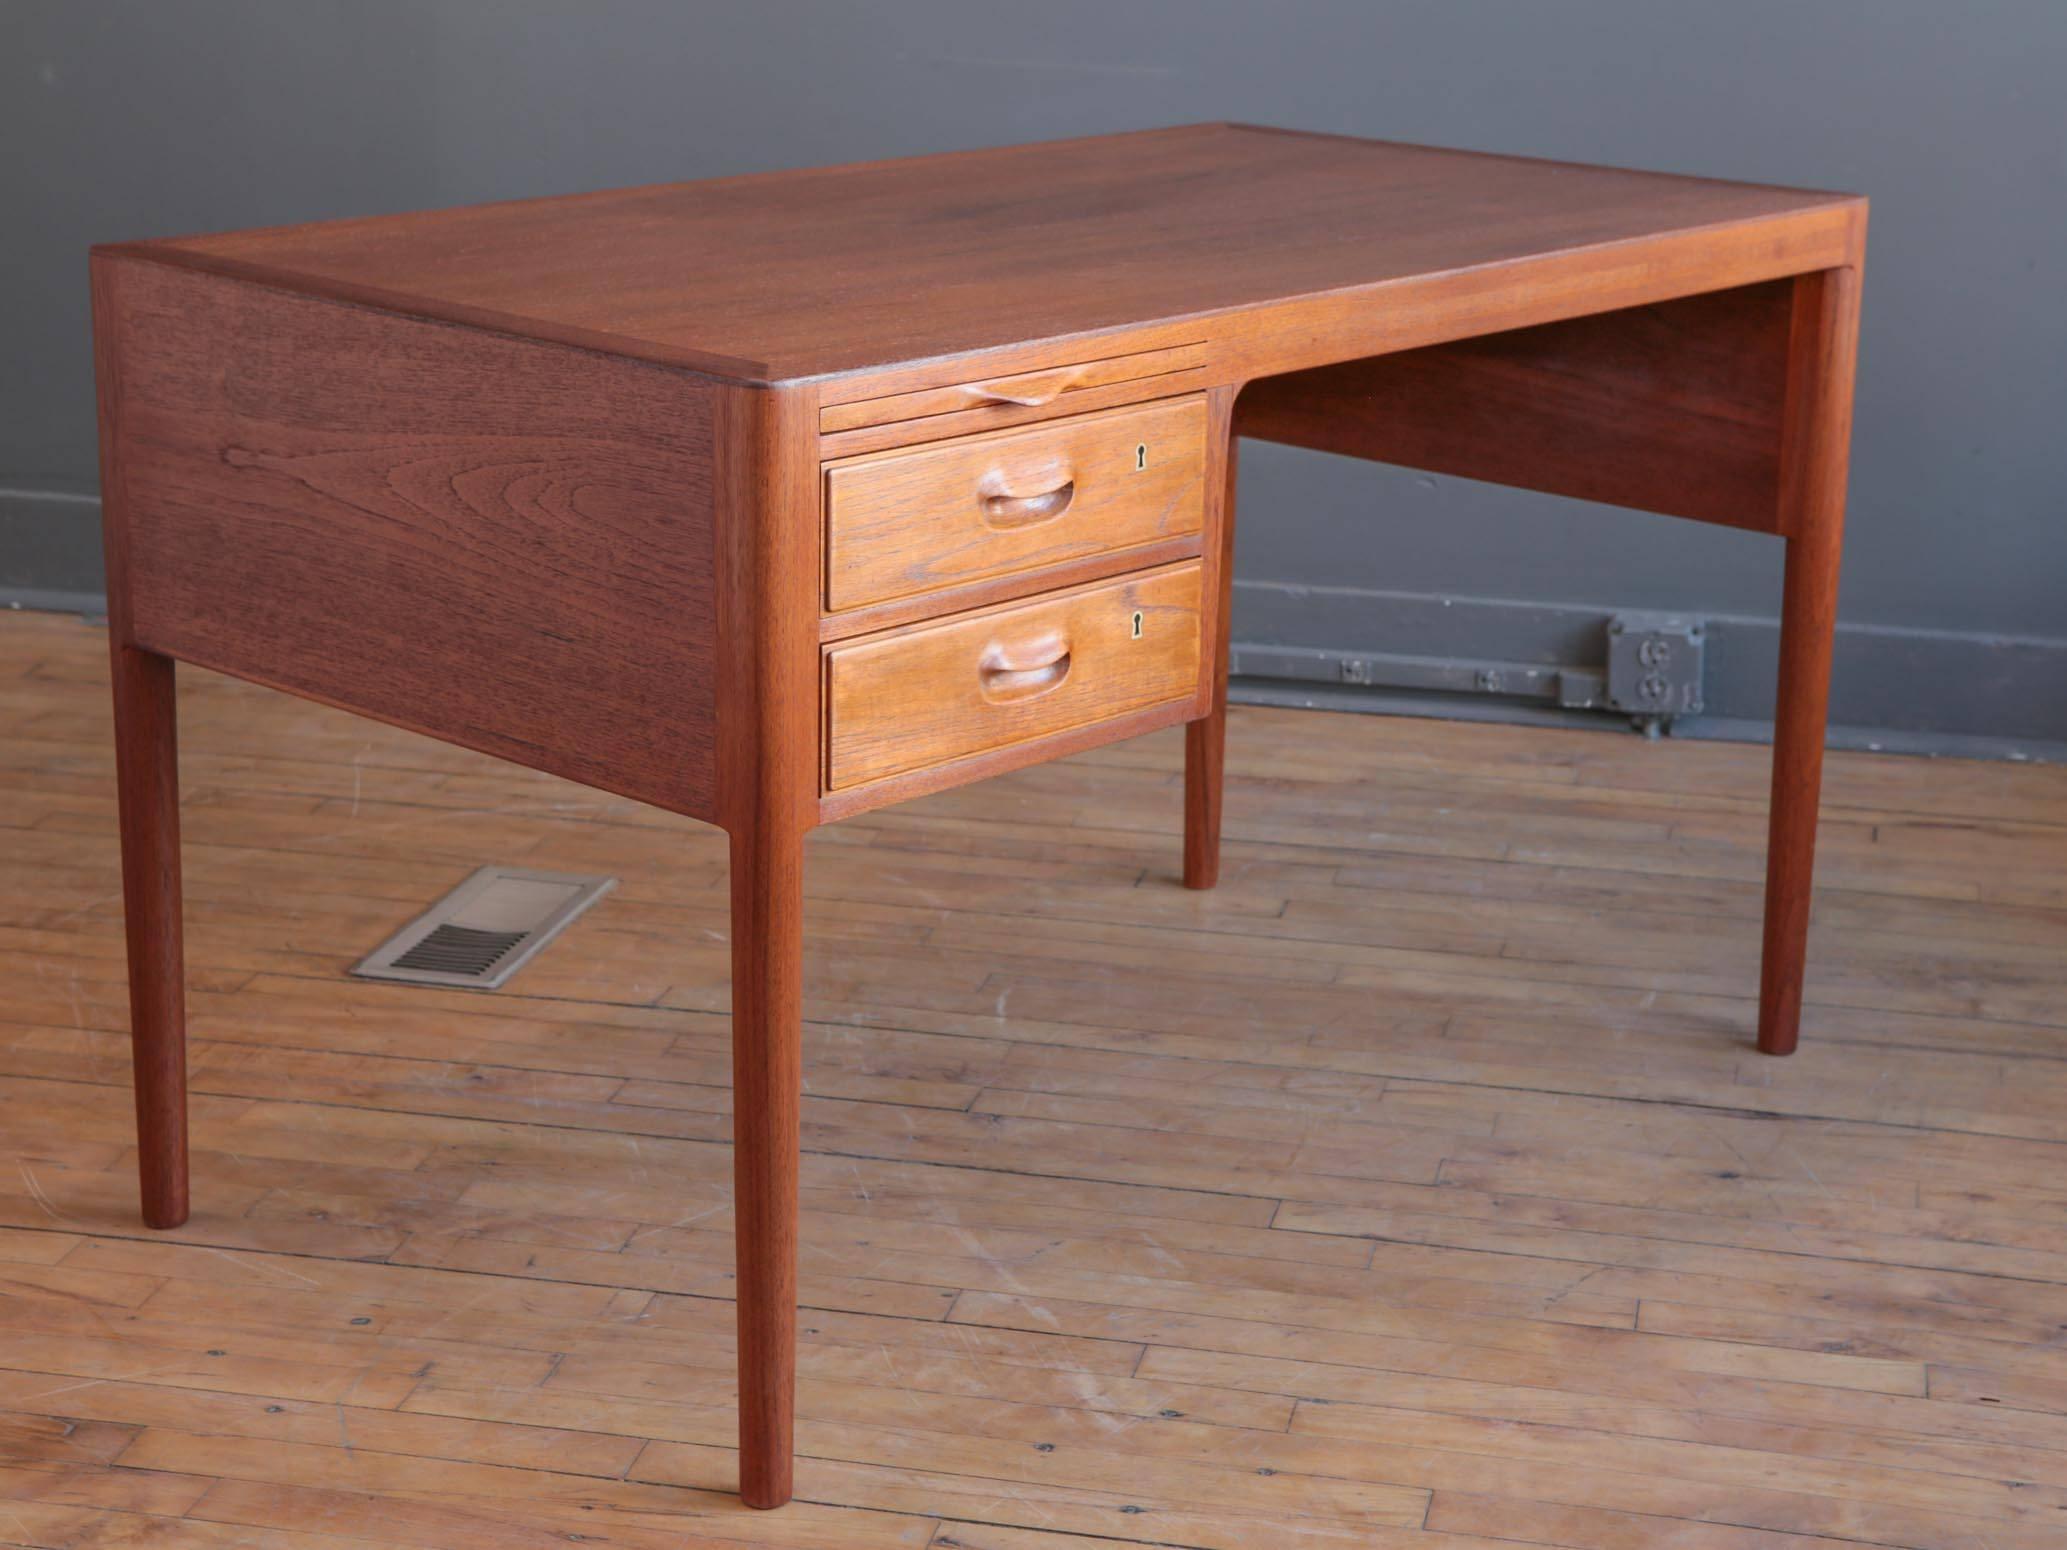 A seldom seen teak writing desk by Danish designer Hans Wegner for Johannes Hansen, circa 1960s. Featuring two locking drawers with sculpted handles and pull-out writing surface. Turned legs and subtle details enhance Classic, well-proportioned